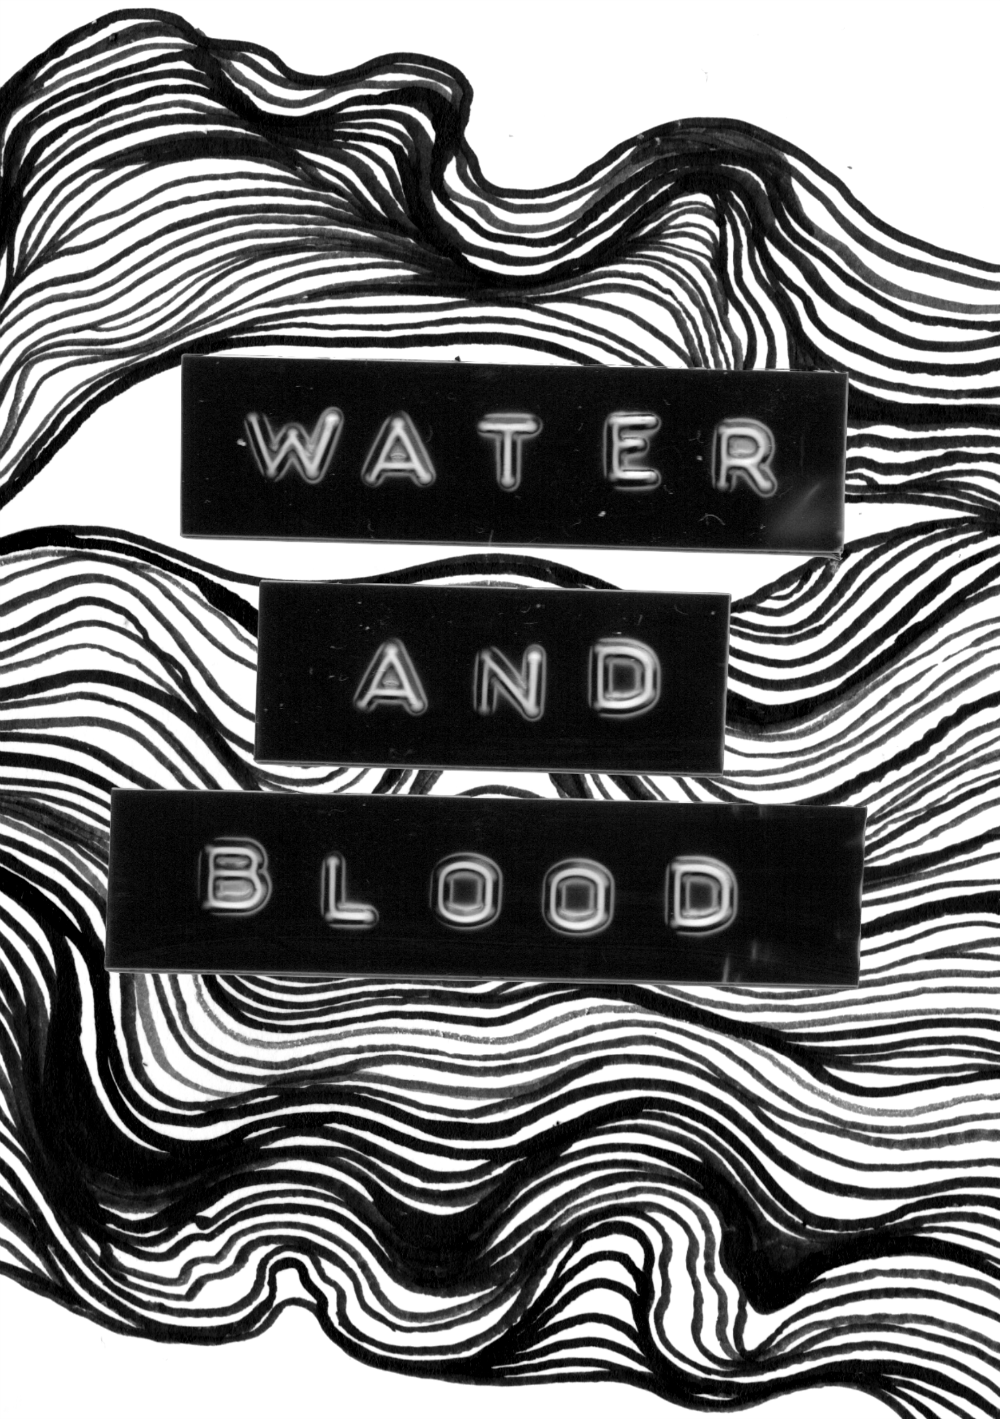 Image of Water and Blood